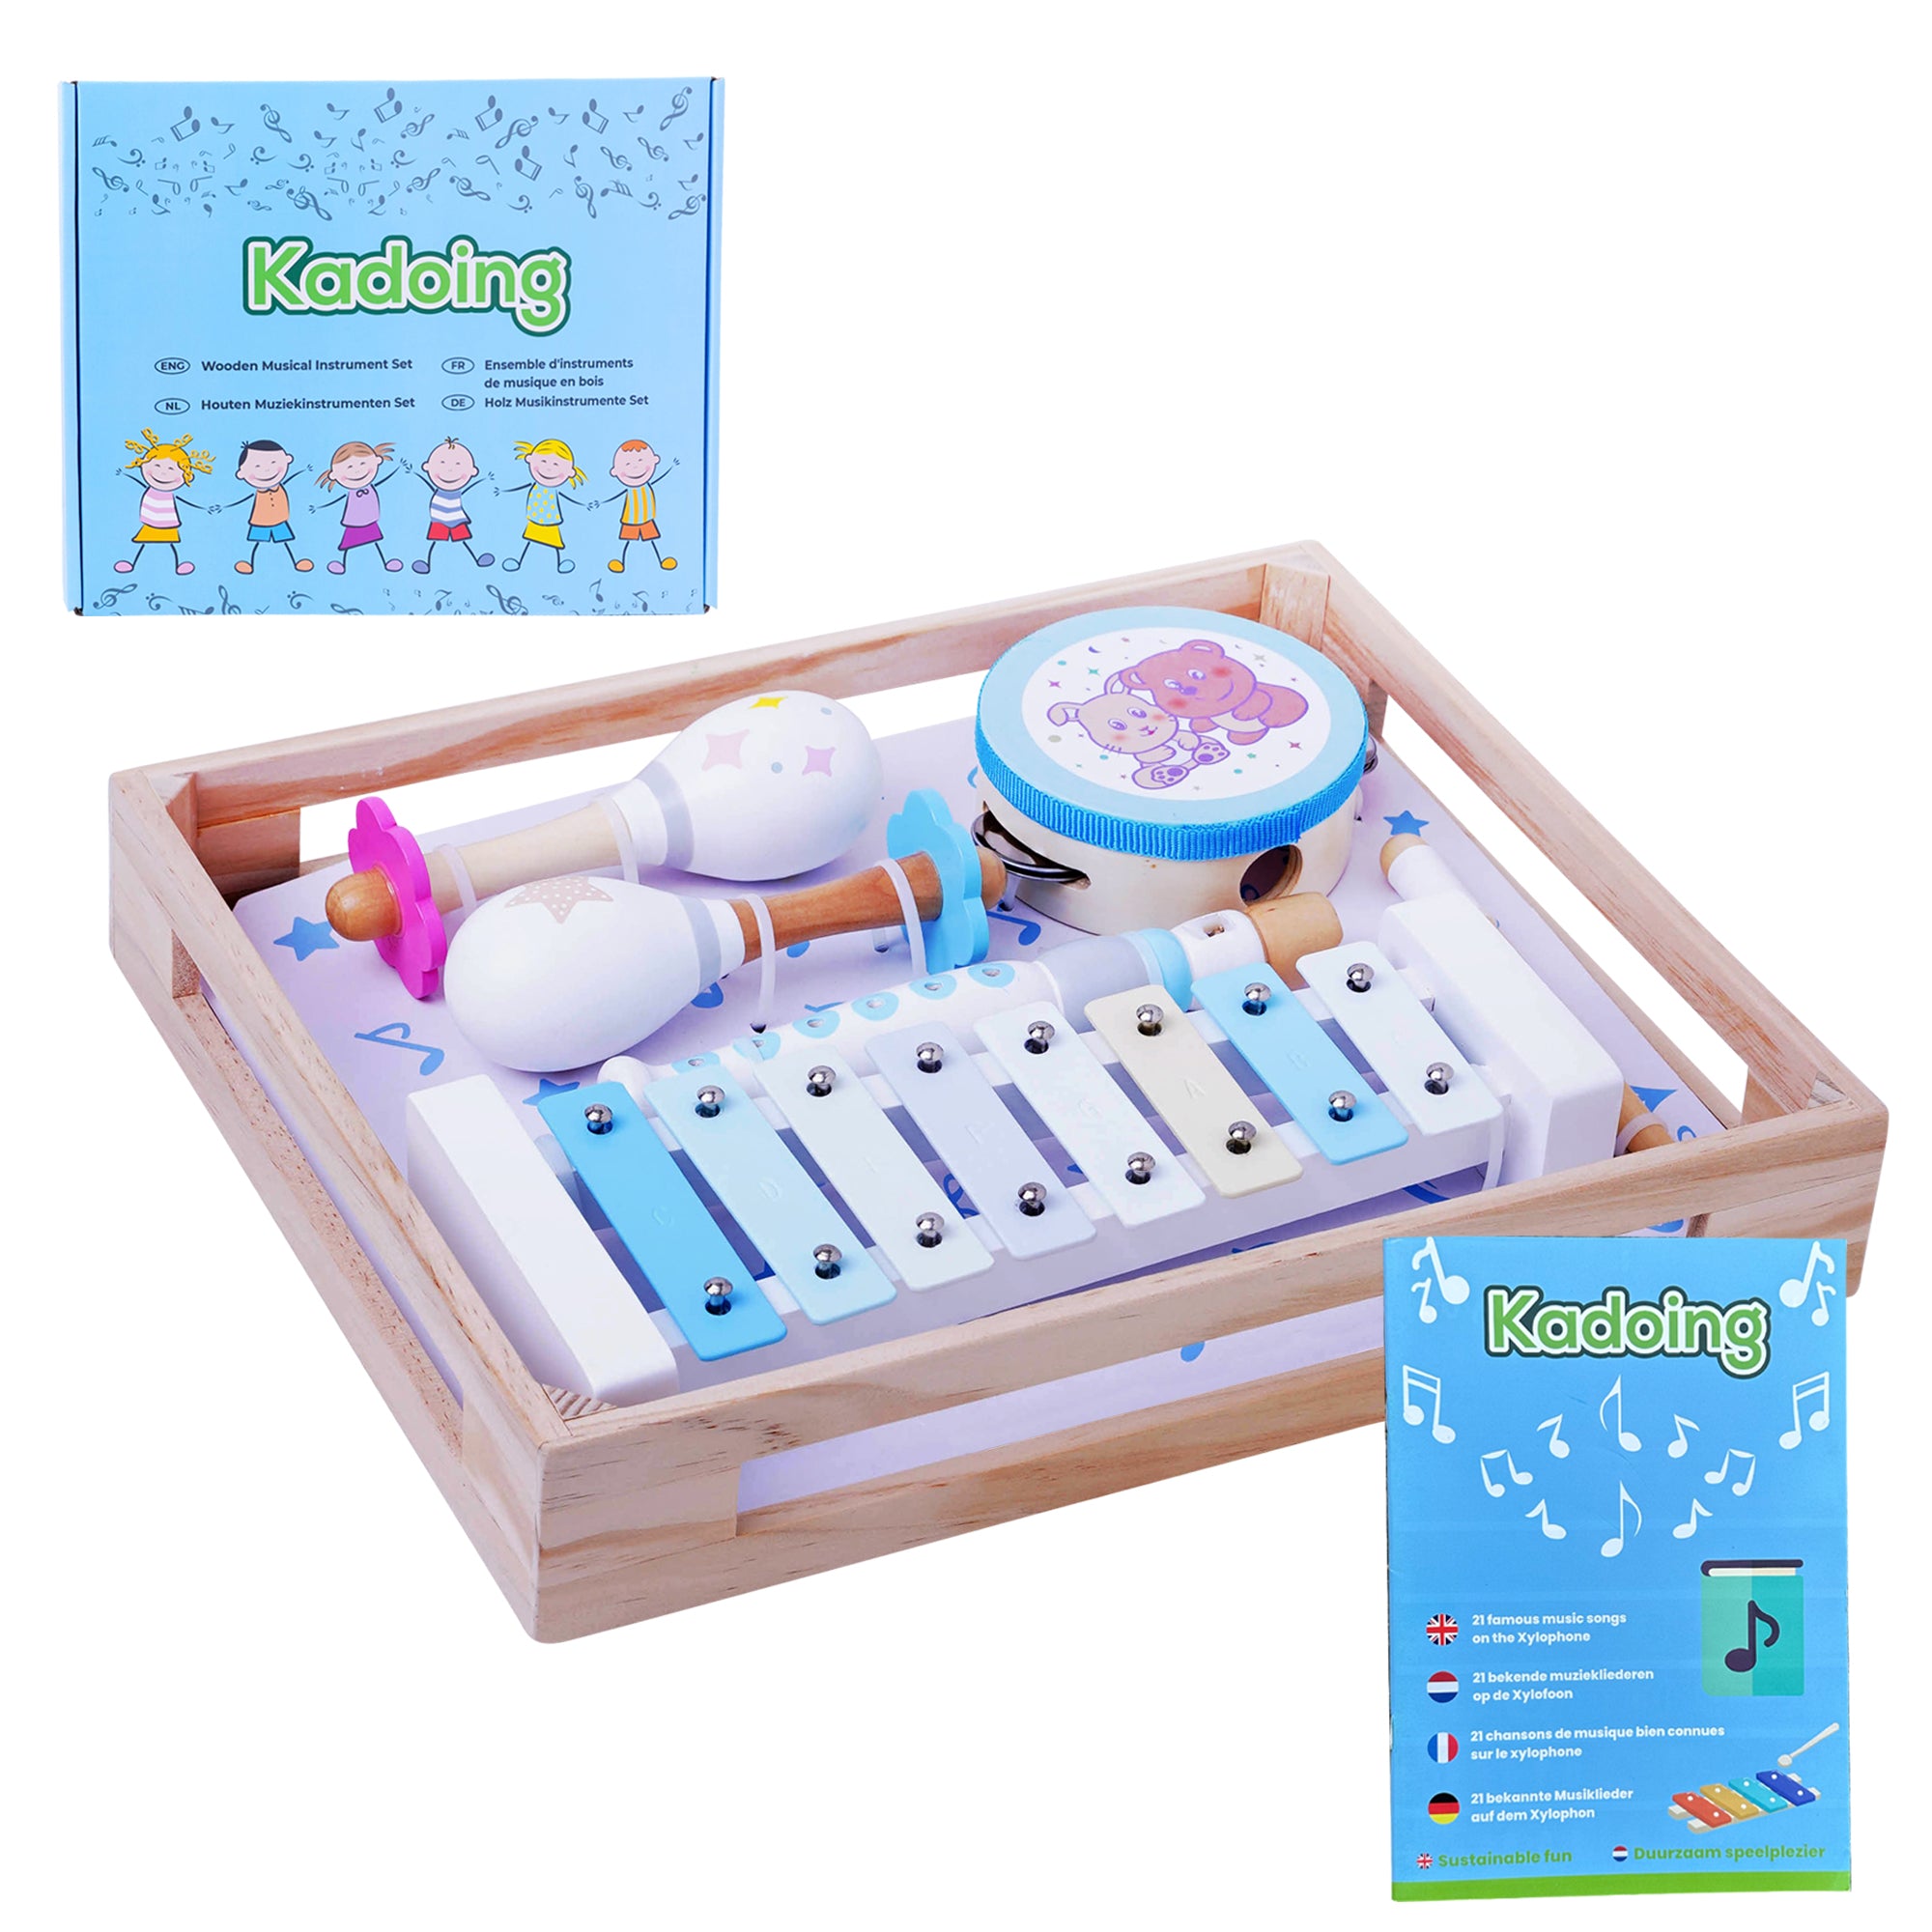 Kadoing Wooden Musical Instruments Set - incl. Storage crate and Music Booklet - Xylophone - Montessori Toys - Children's Toys - Music for Children